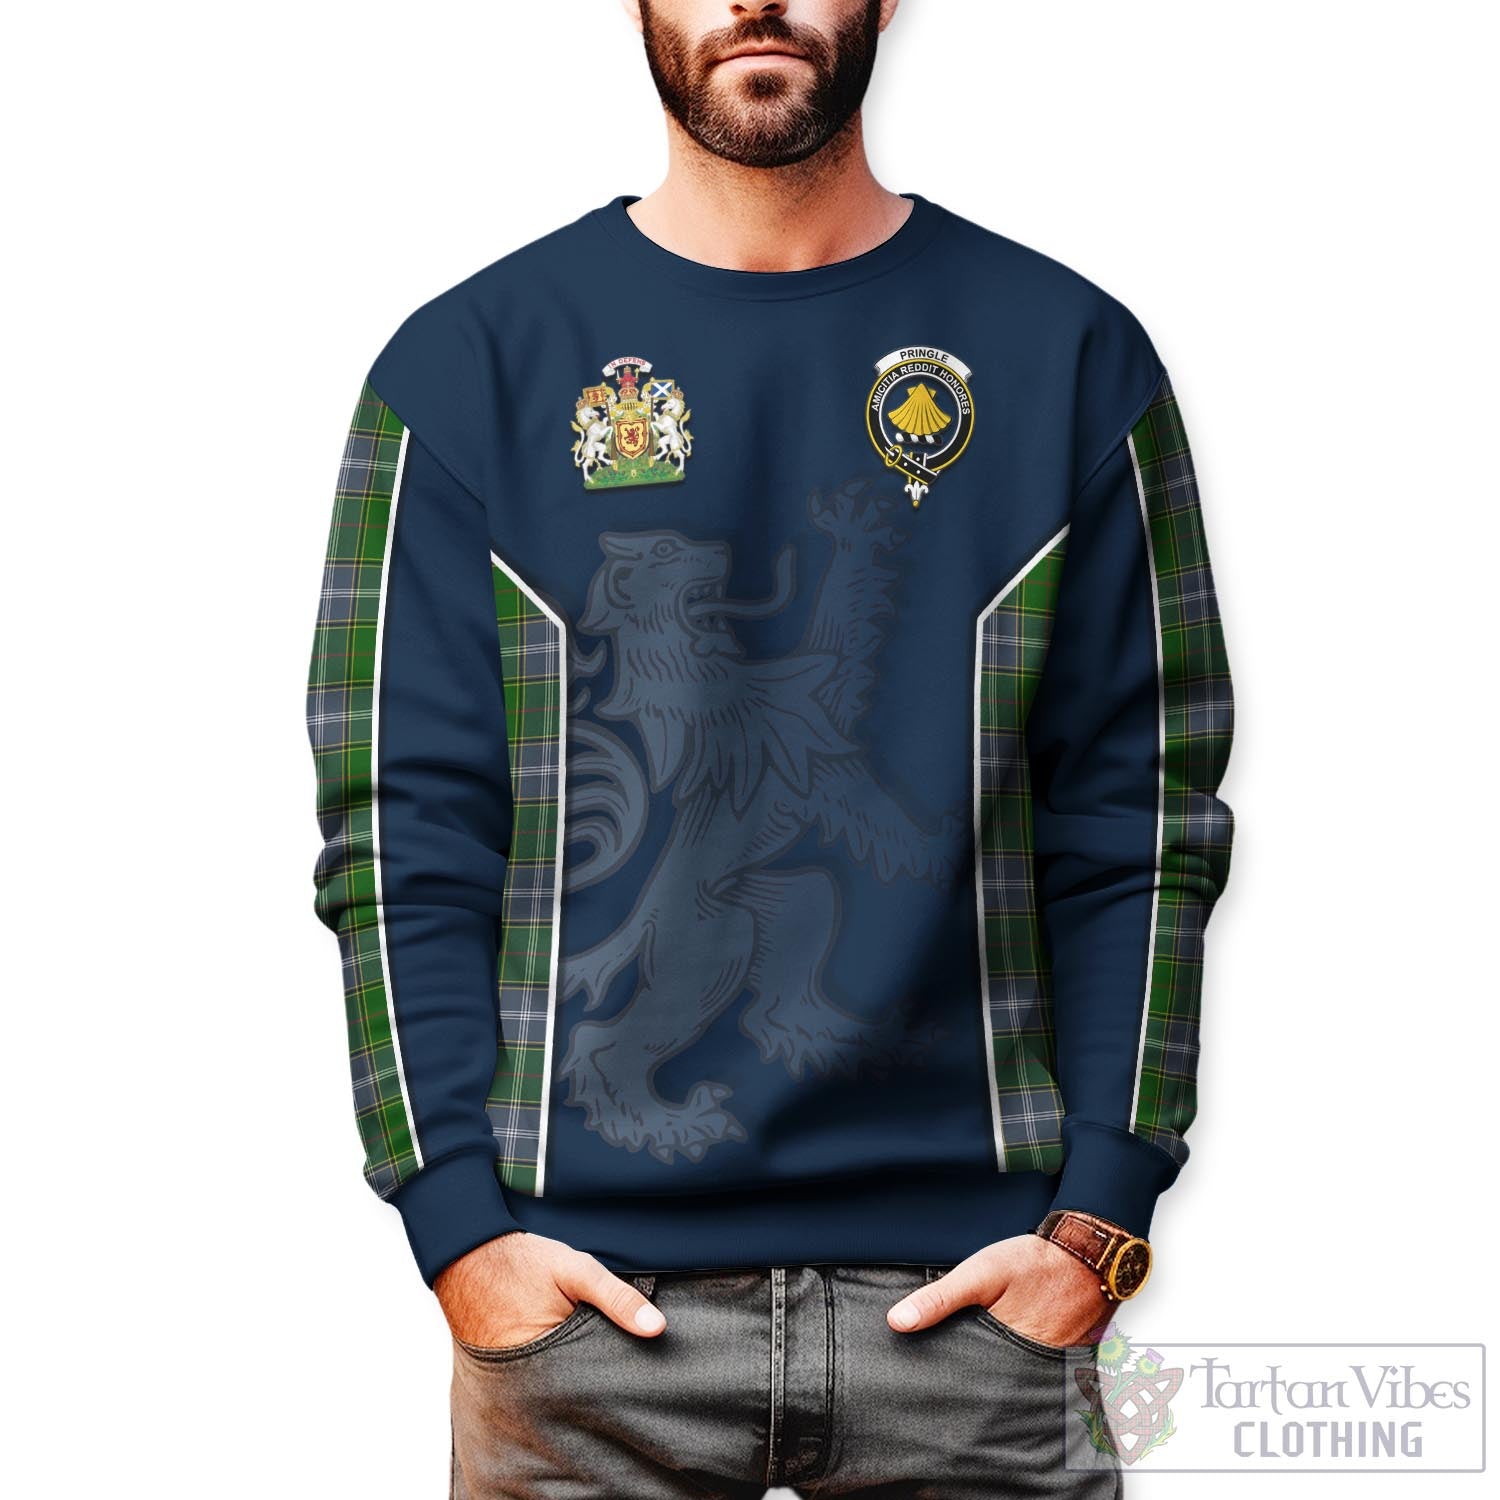 Tartan Vibes Clothing Pringle Tartan Sweater with Family Crest and Lion Rampant Vibes Sport Style